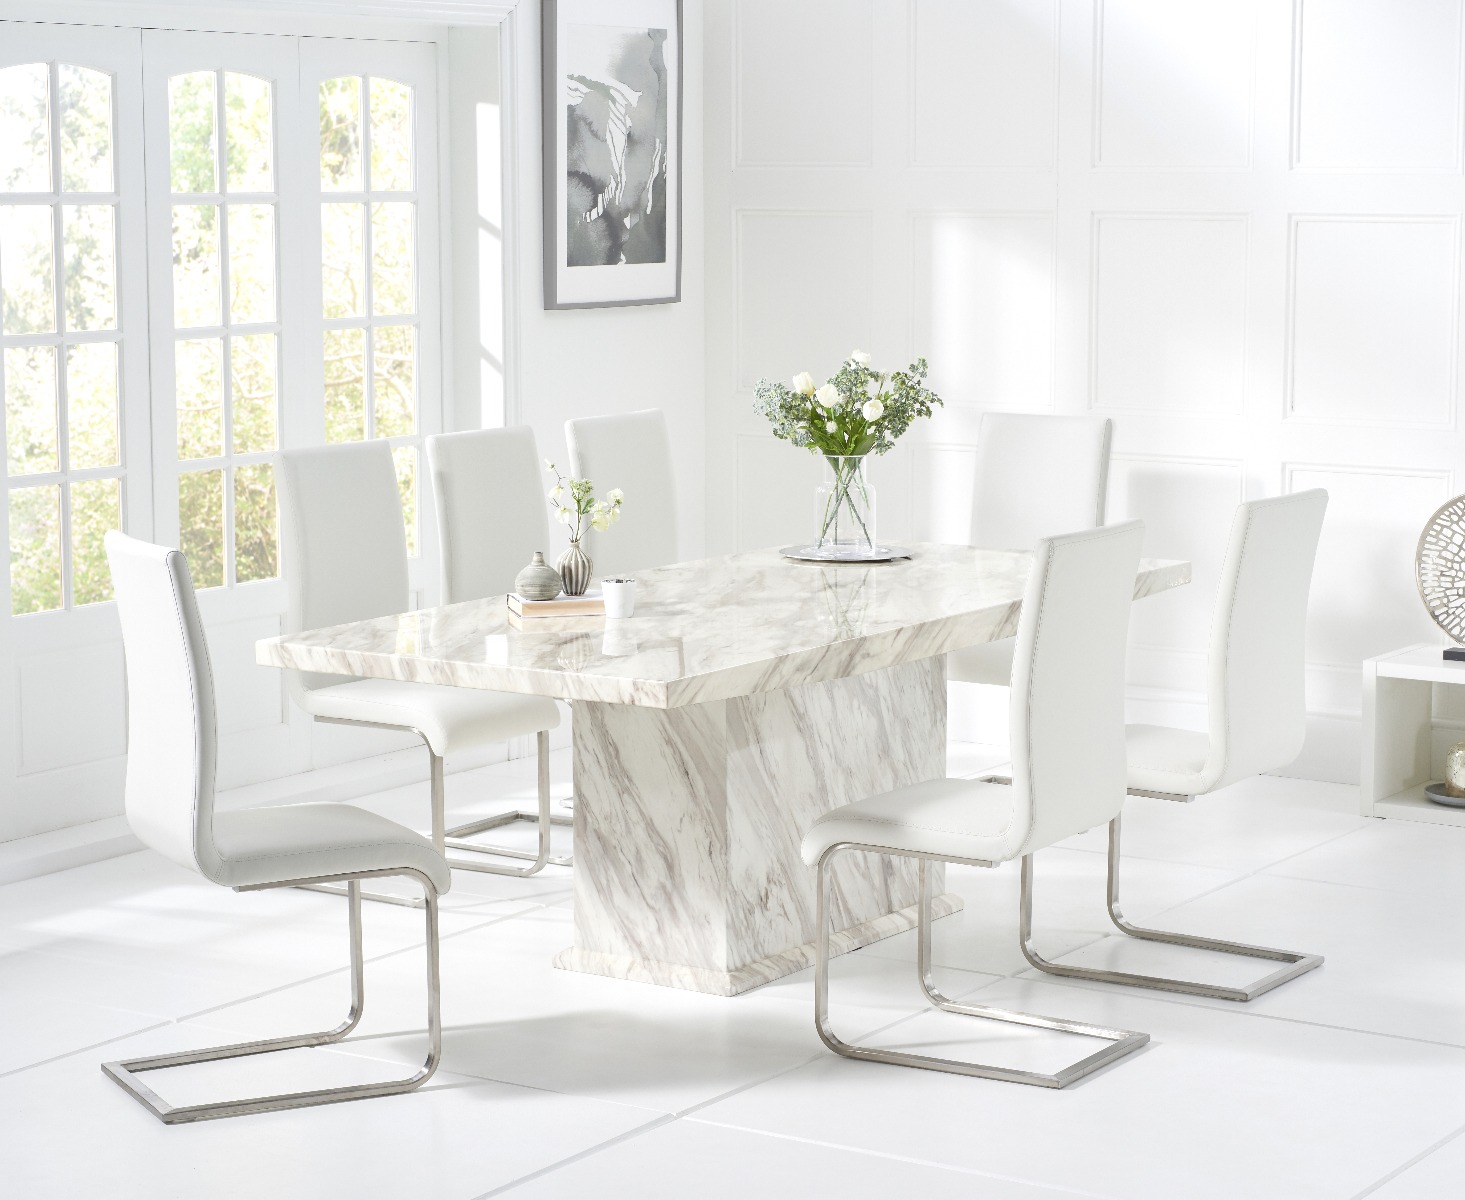 Calacatta 220cm Marbleeffect Dining Table With 8 White Malaga Chairs